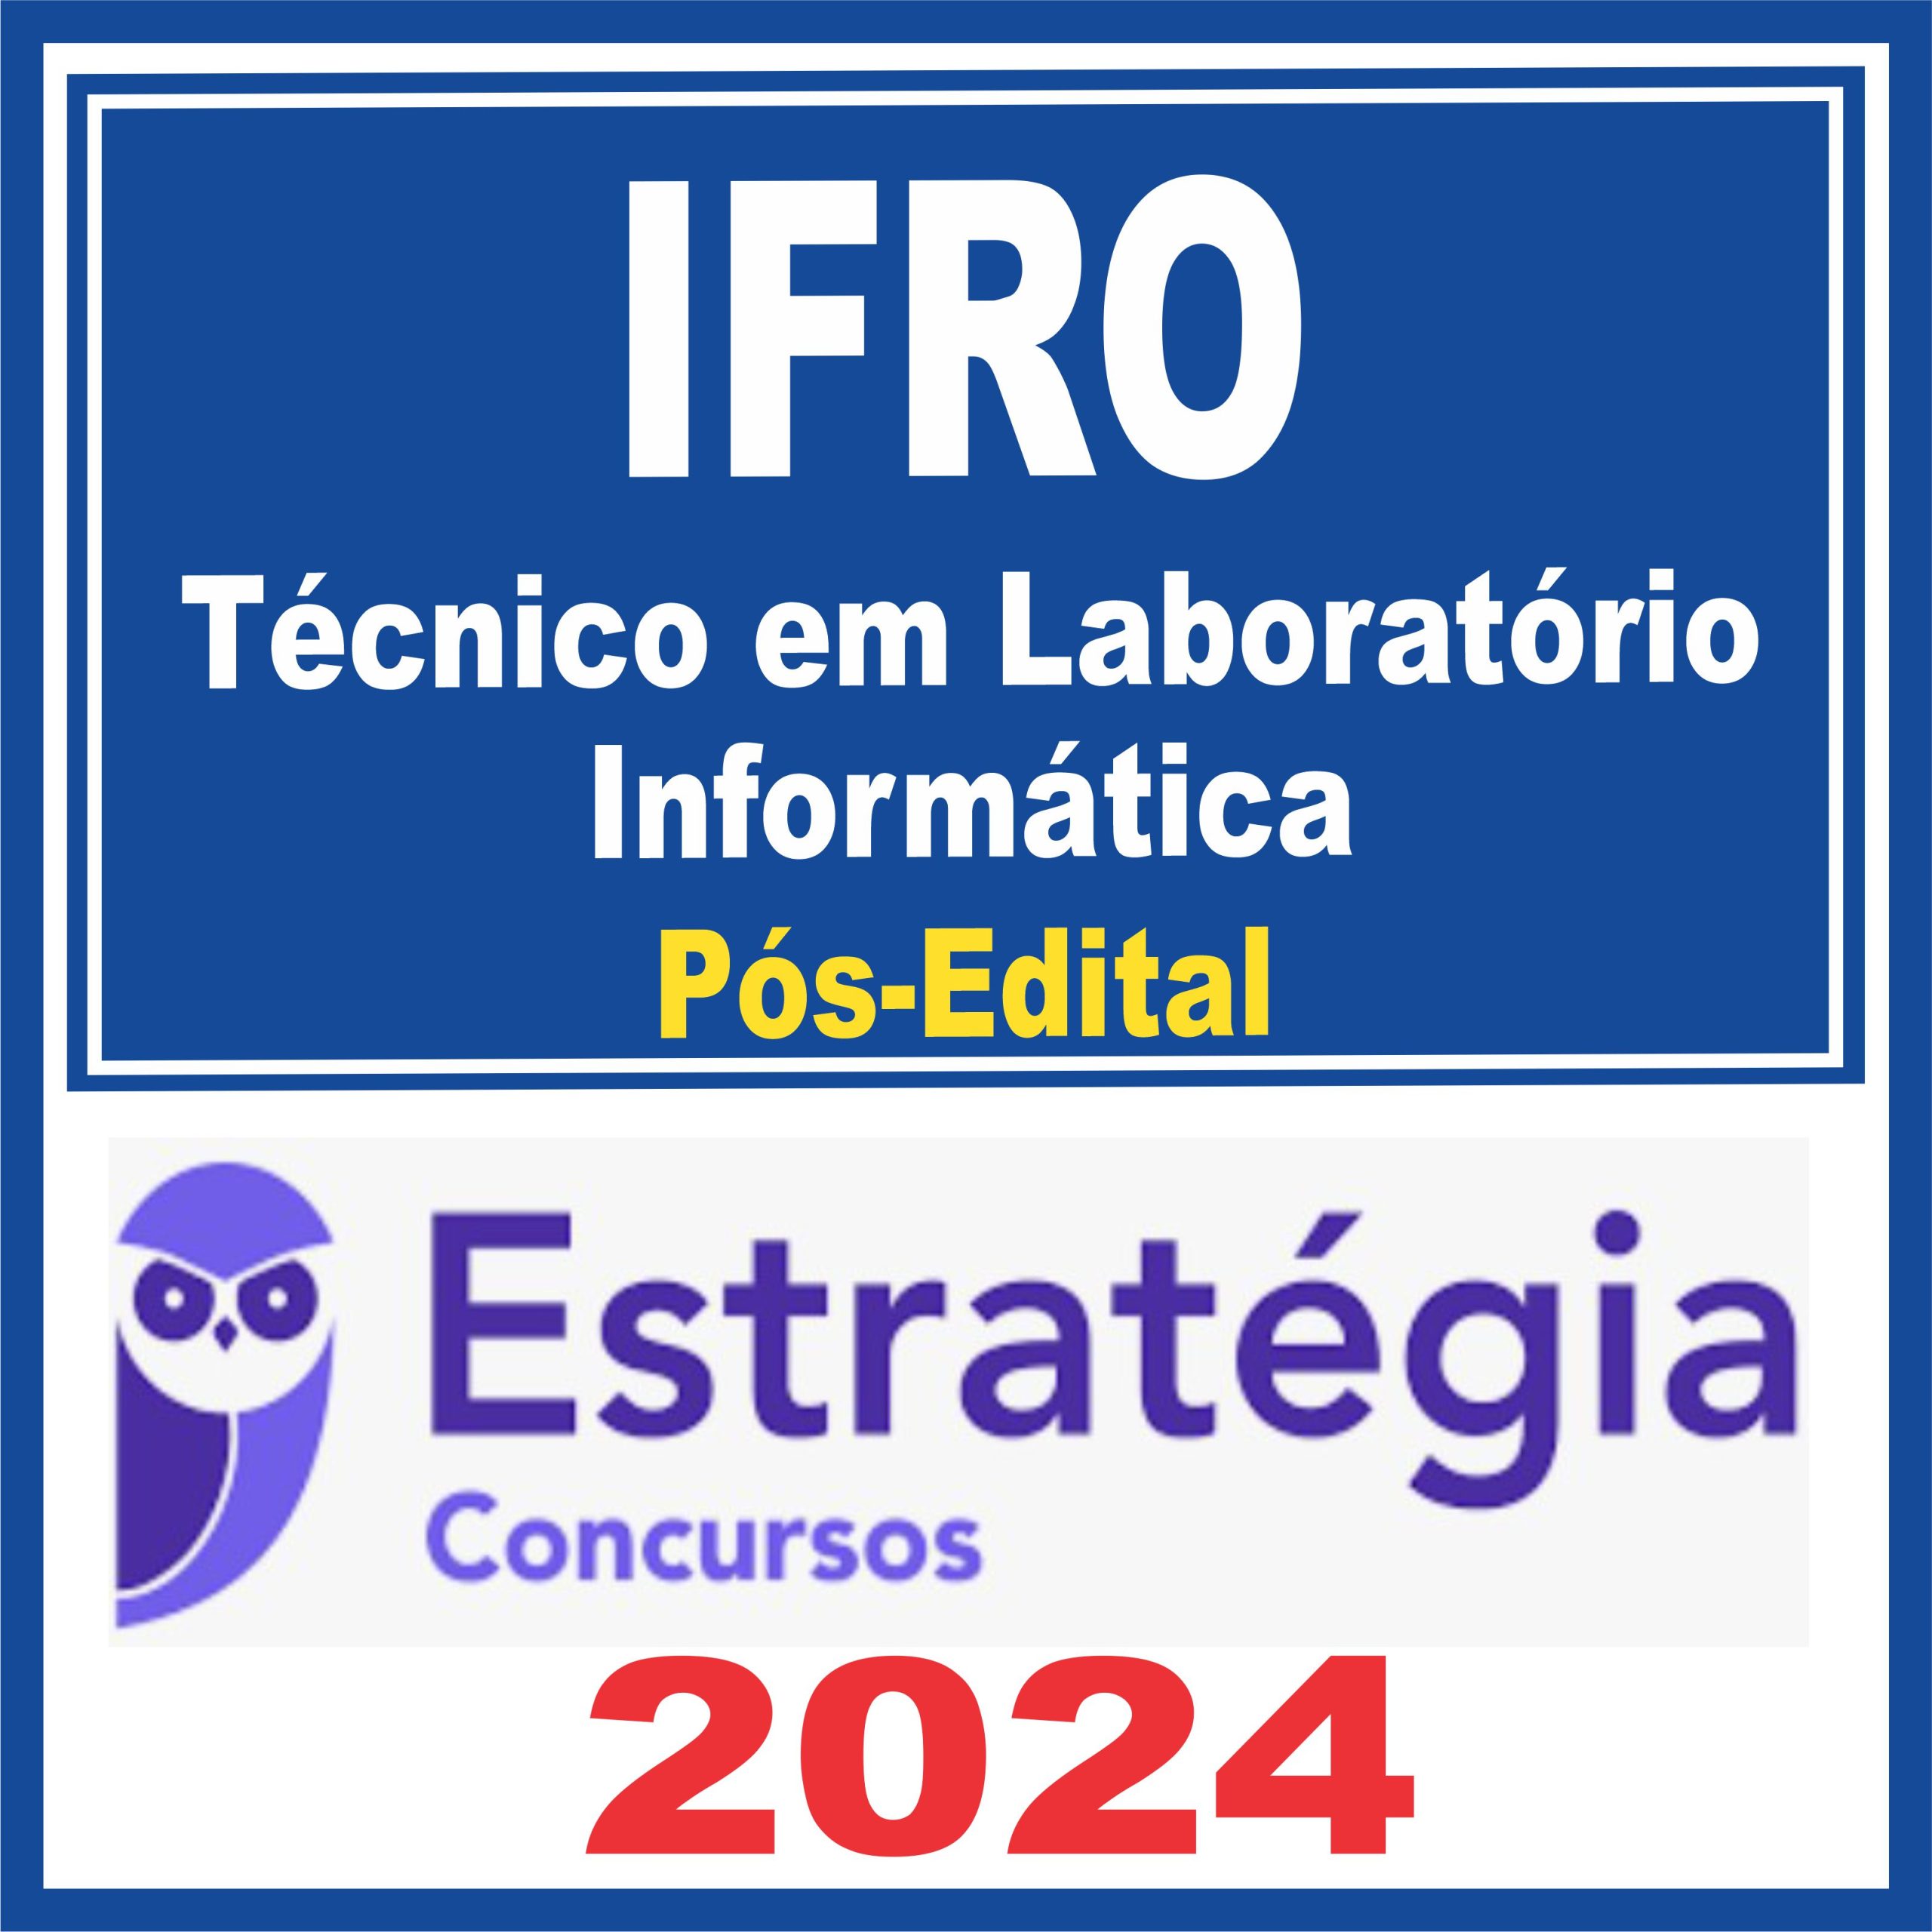 ifro-tec-lab-info